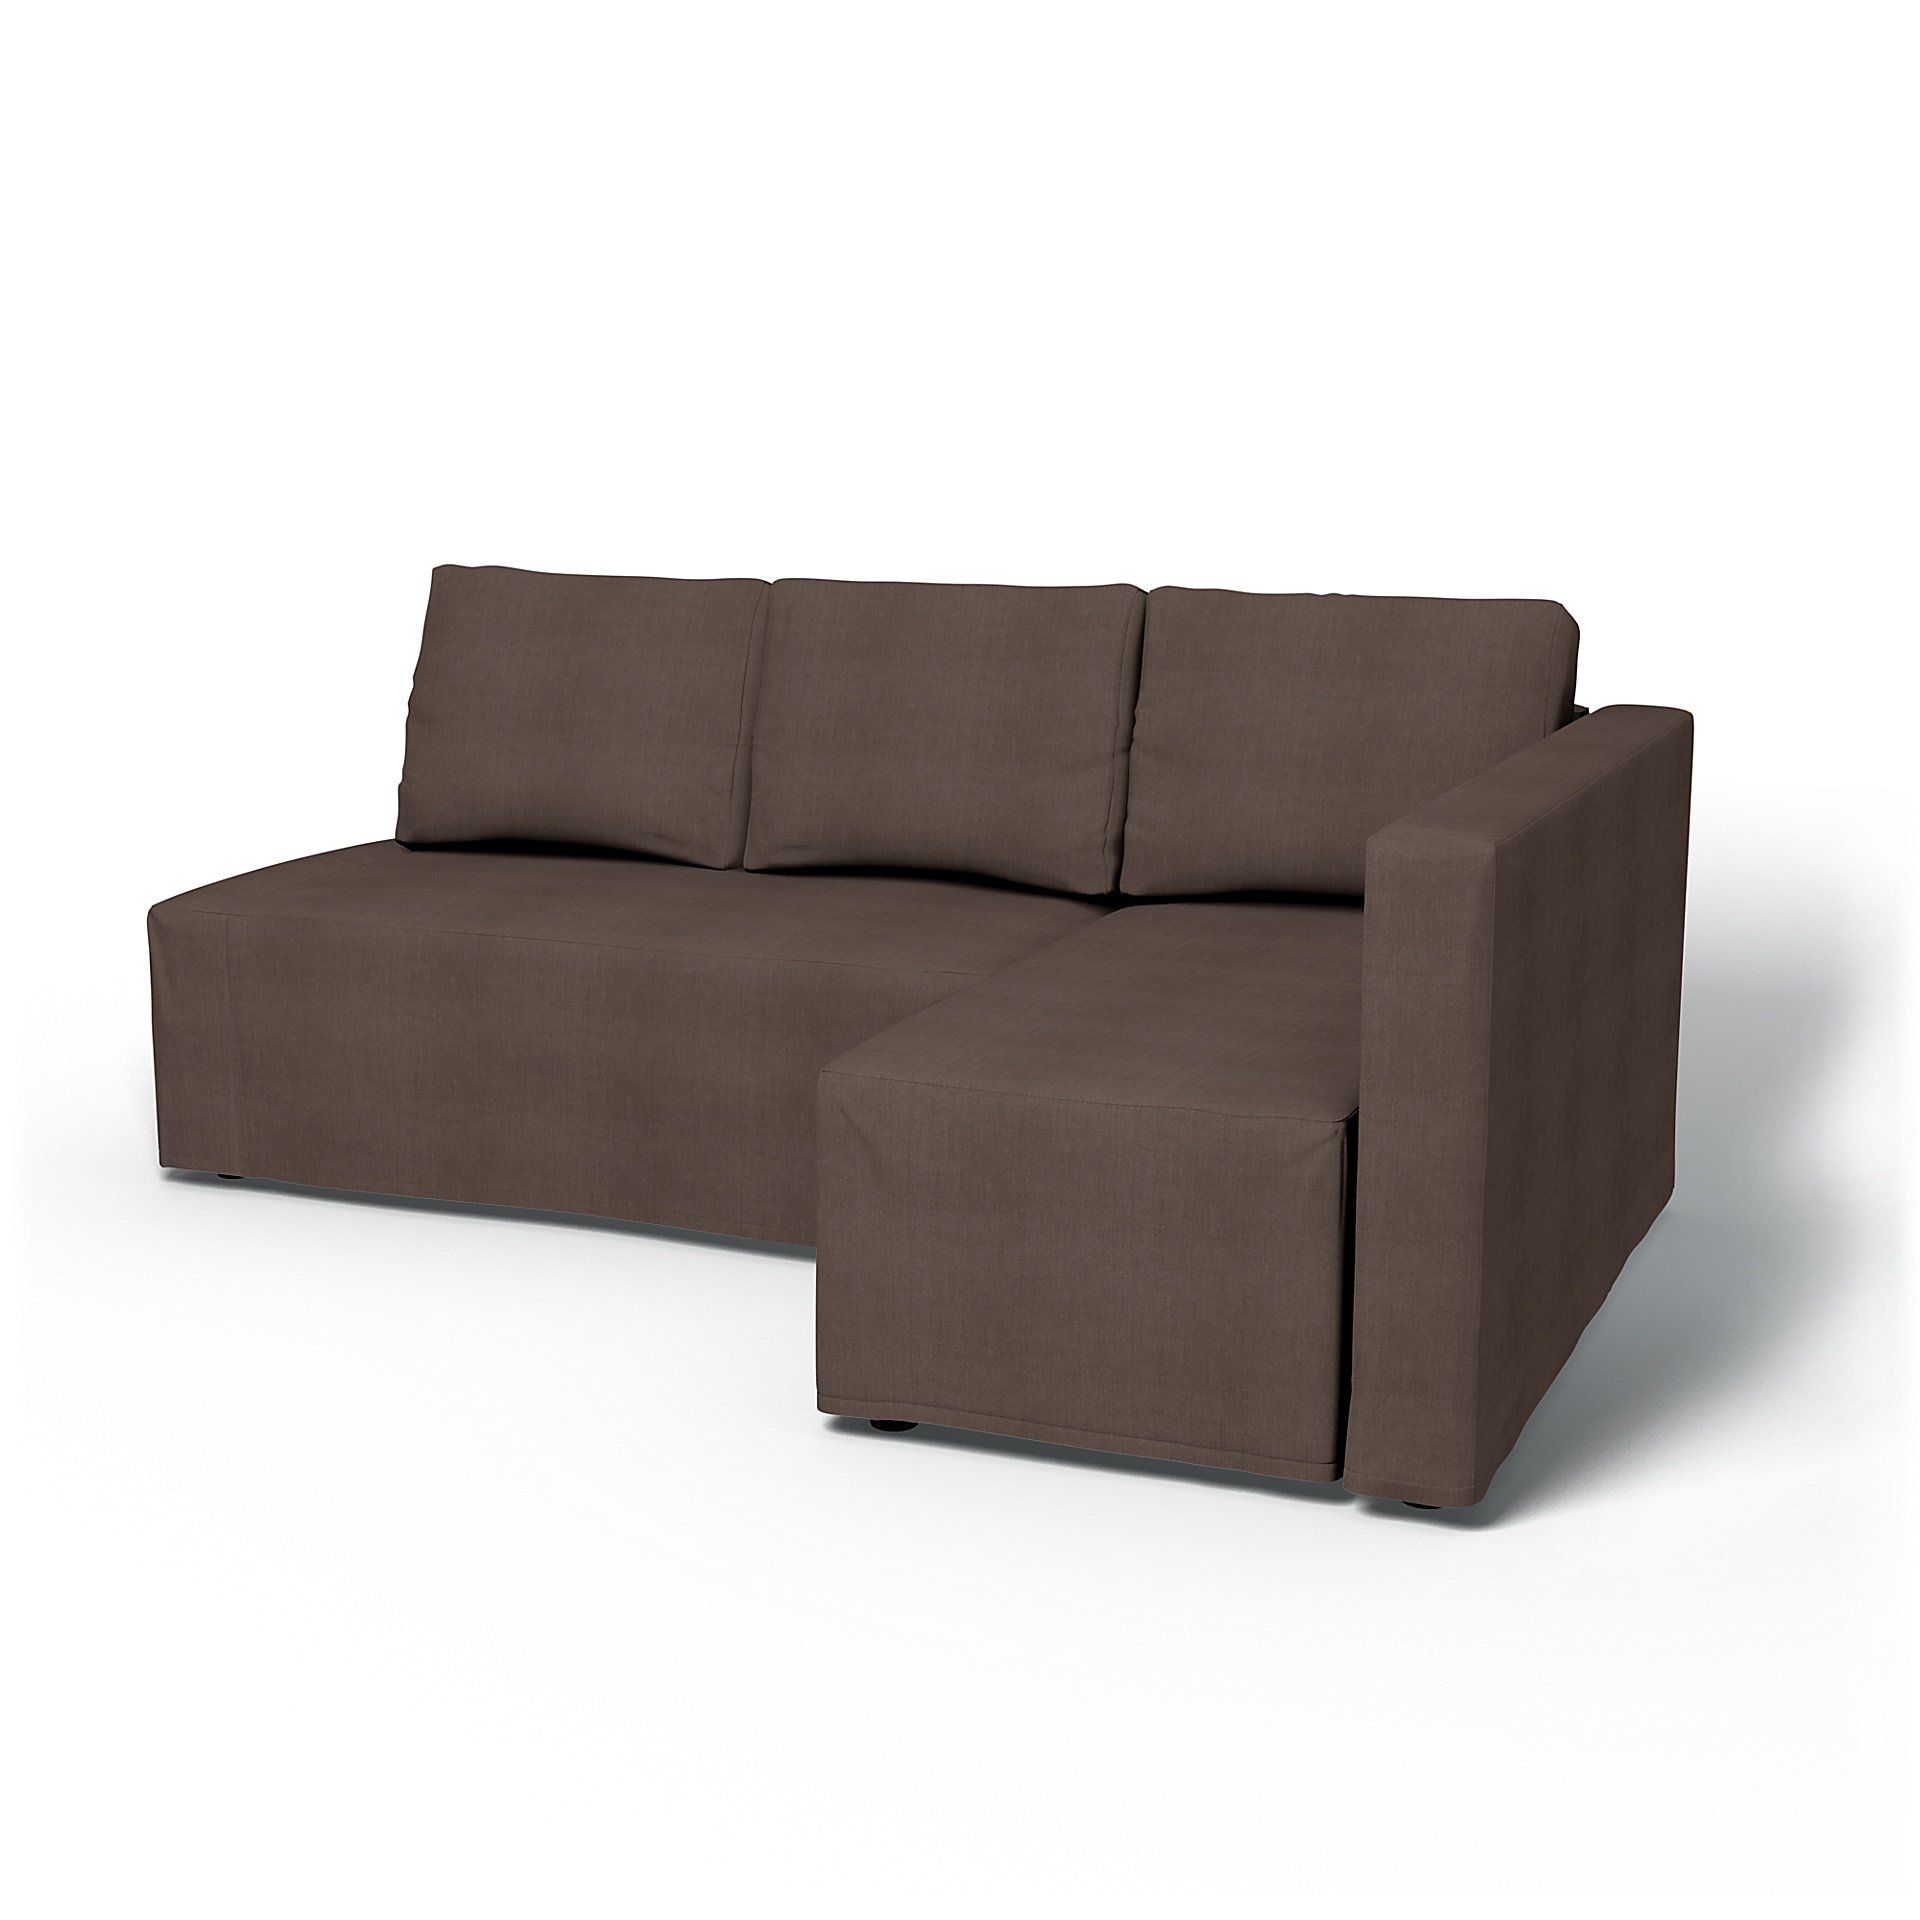 IKEA - Friheten Sofa Bed with Right Chaise Cover, Cocoa, Linen - Bemz